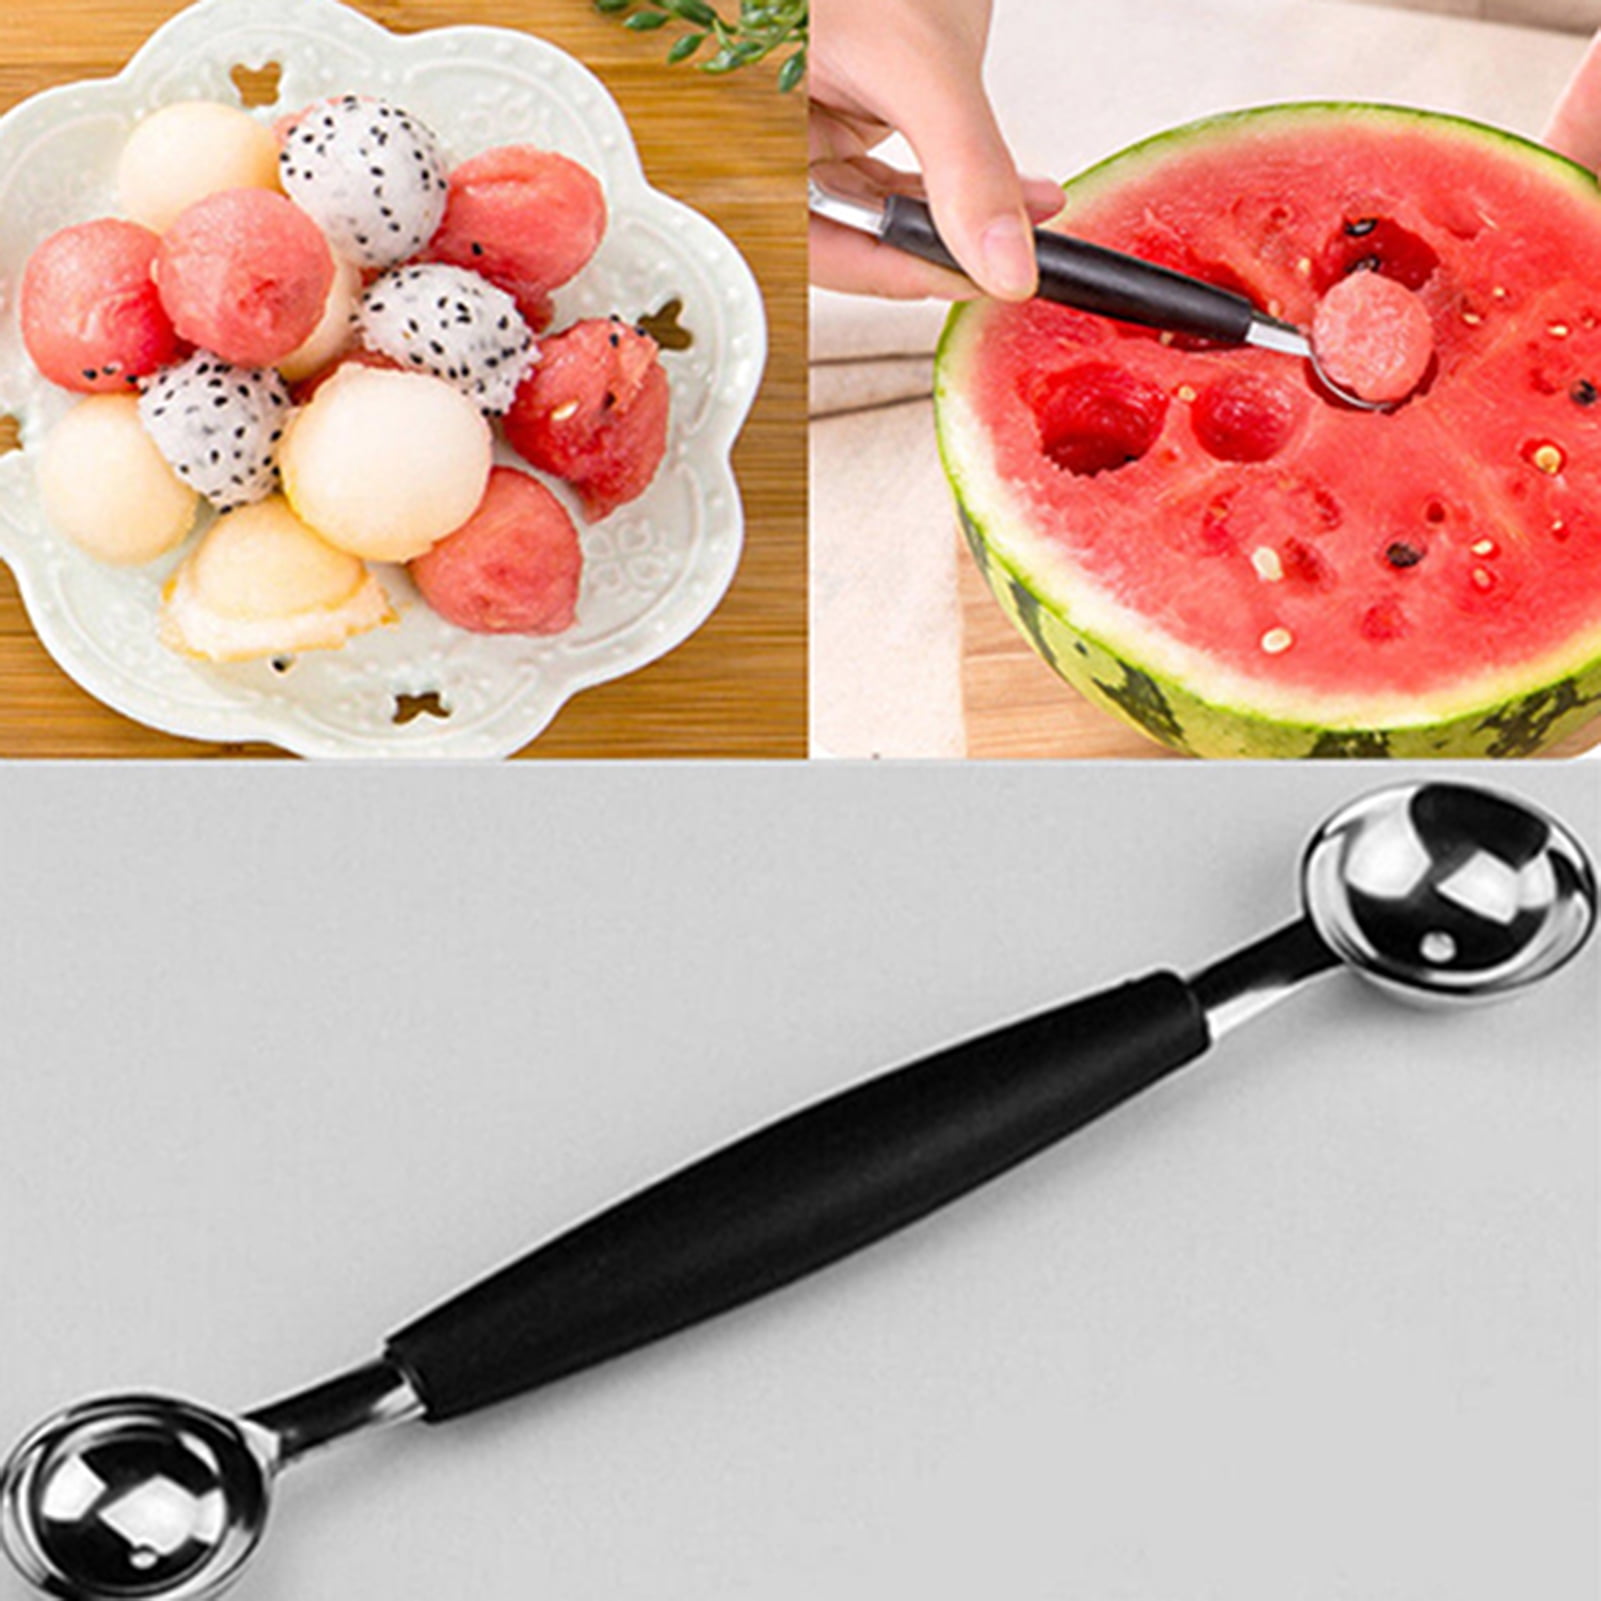 Two Size Ice Cream Scoops Stacks Stainless Steel Ice Cream Digger Non-Stick  Fruit Ice Ball Maker Watermelon Ice Cream Spoon Tool